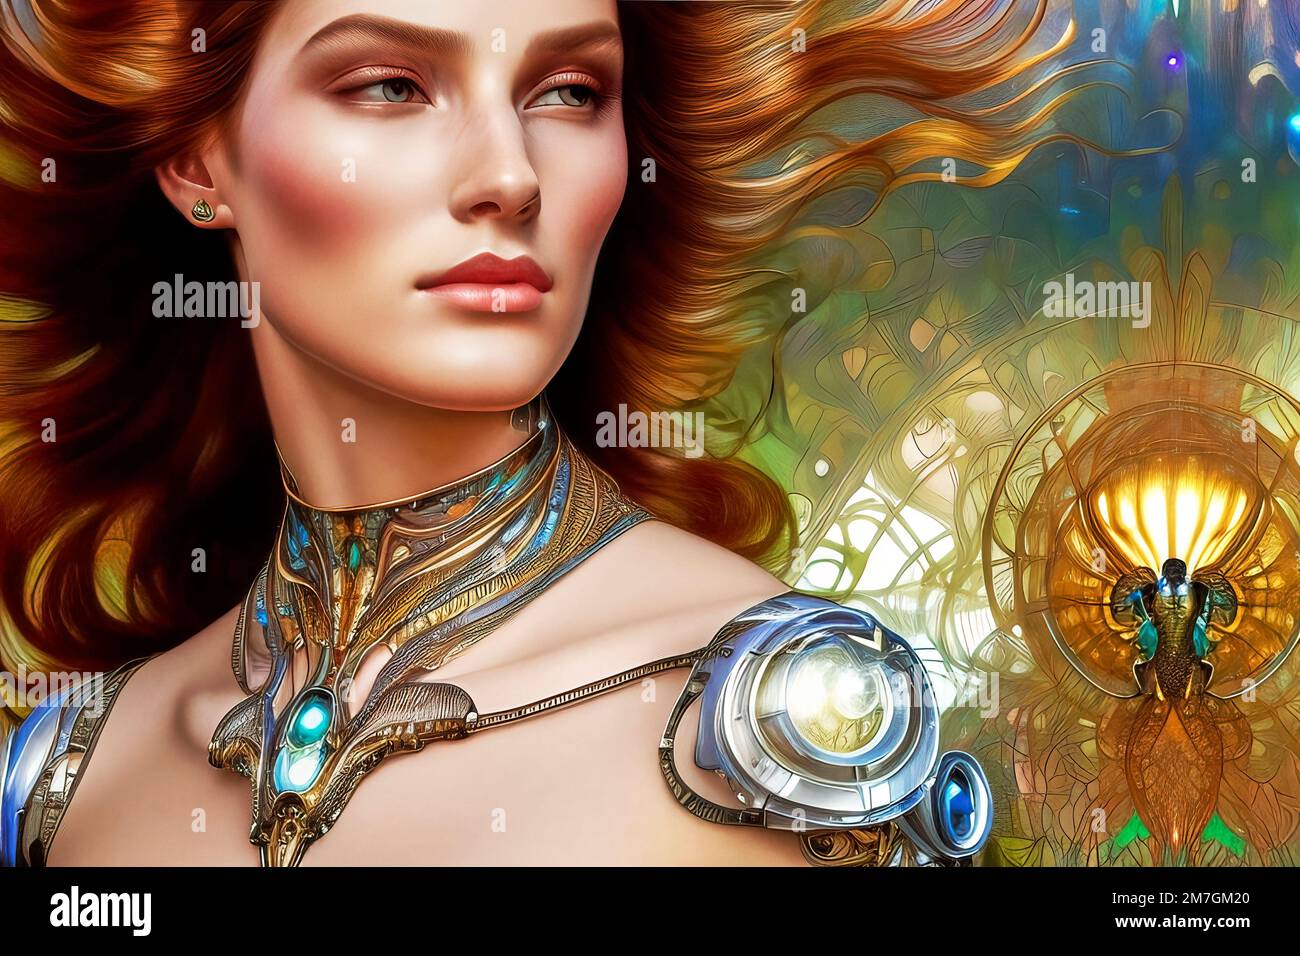 Illustration of a woman with flowing red hair and filigree luxurious jewelry at the neck and across her shoulders, fictional person. Made with generat Stock Photo